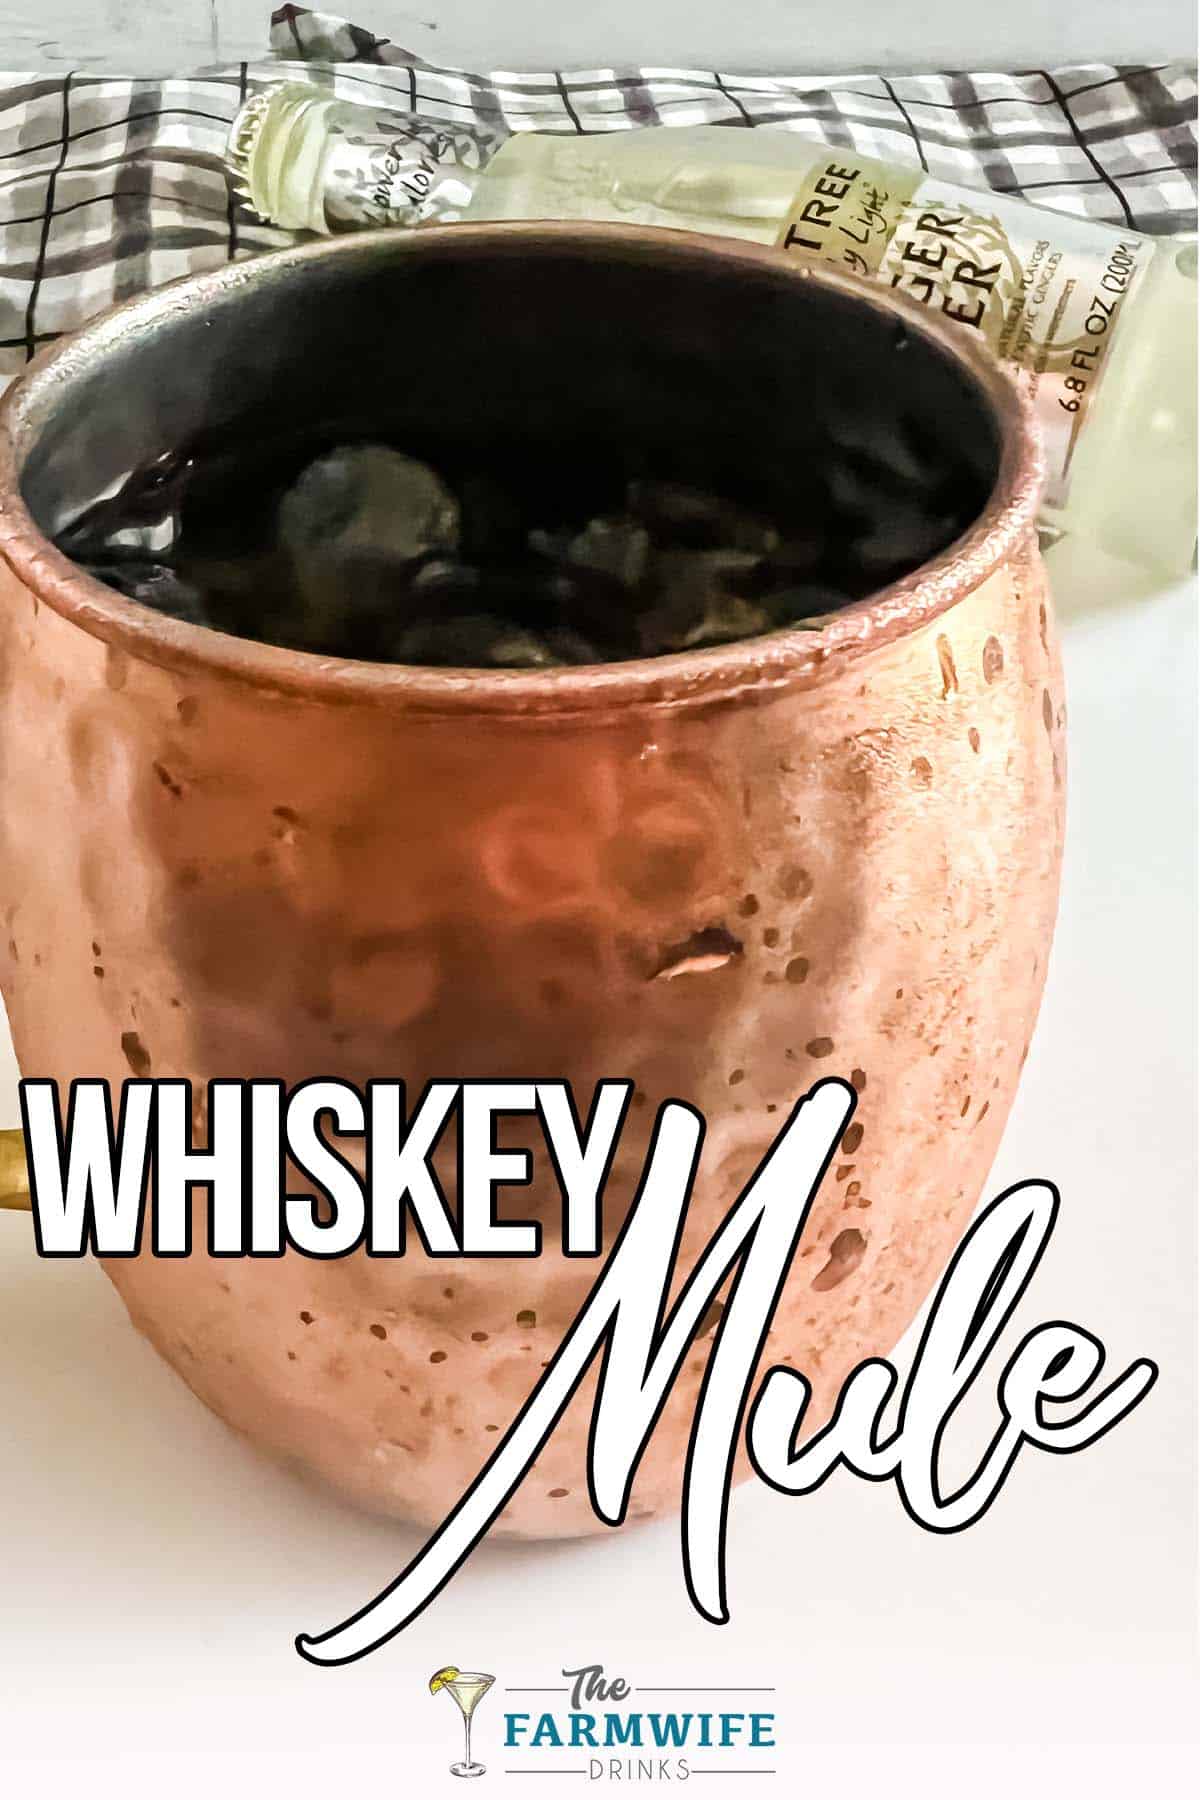 whiskey moscow mule with ginger beer with text which reads whiskey mule